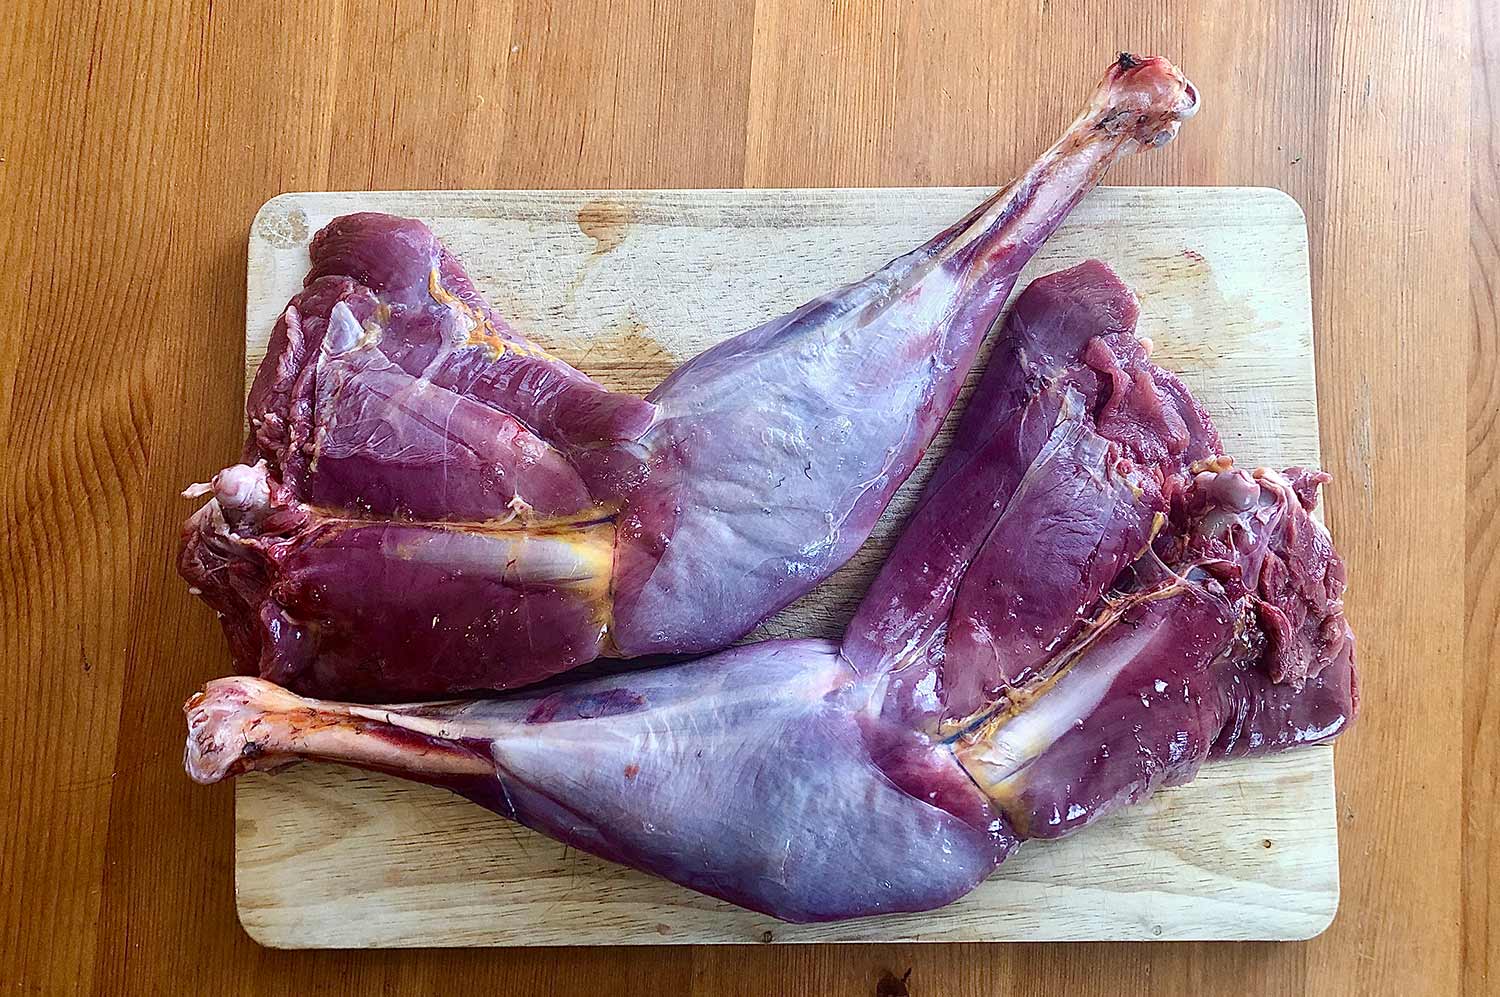 Two turkey legs and thighs on a cutting board.